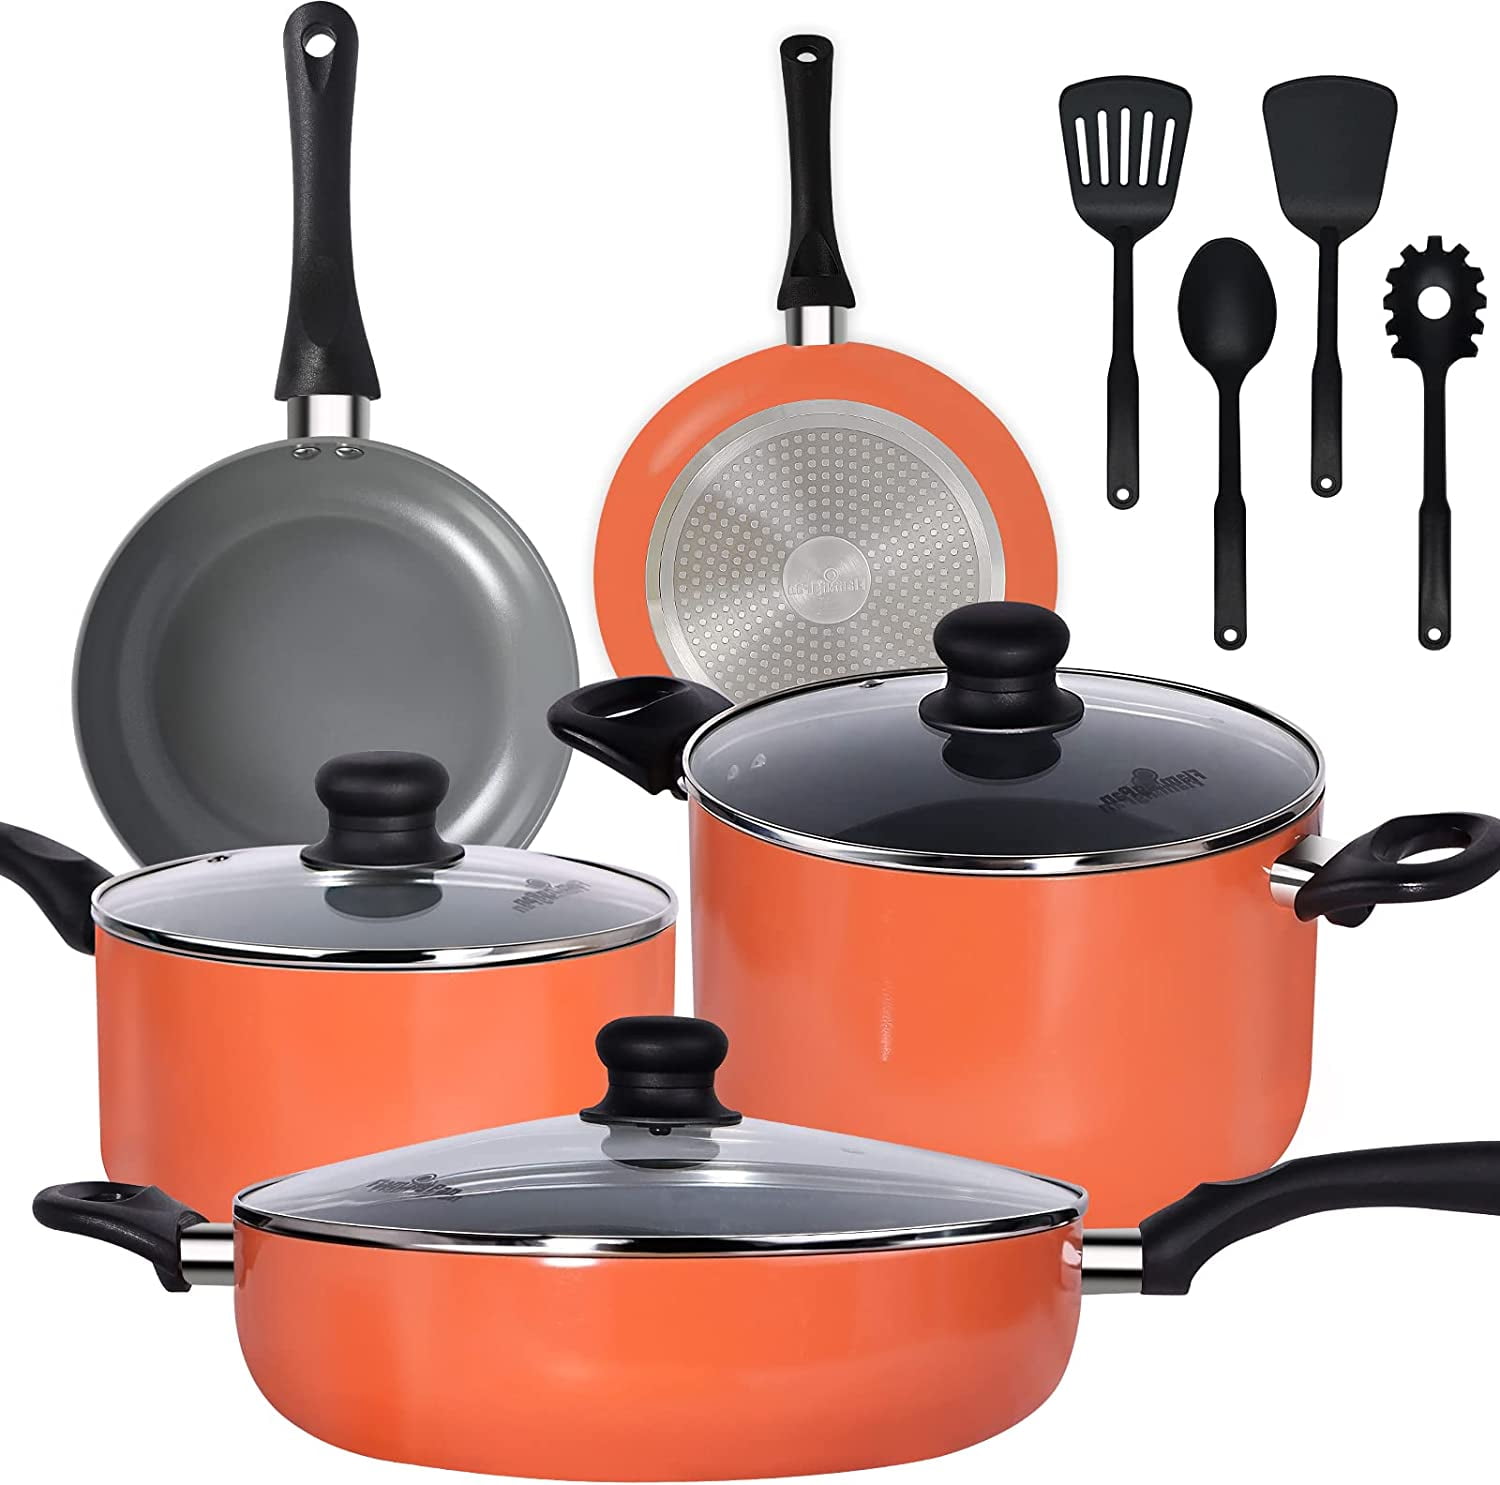 Flamingpan 12 Piece Nonstick Pots and Pans Sets,Kitchen Cookware with  Ceramic Coating,Dishwasher Safe,Frying Pan Set with Lid, Induction Pots and  Pans